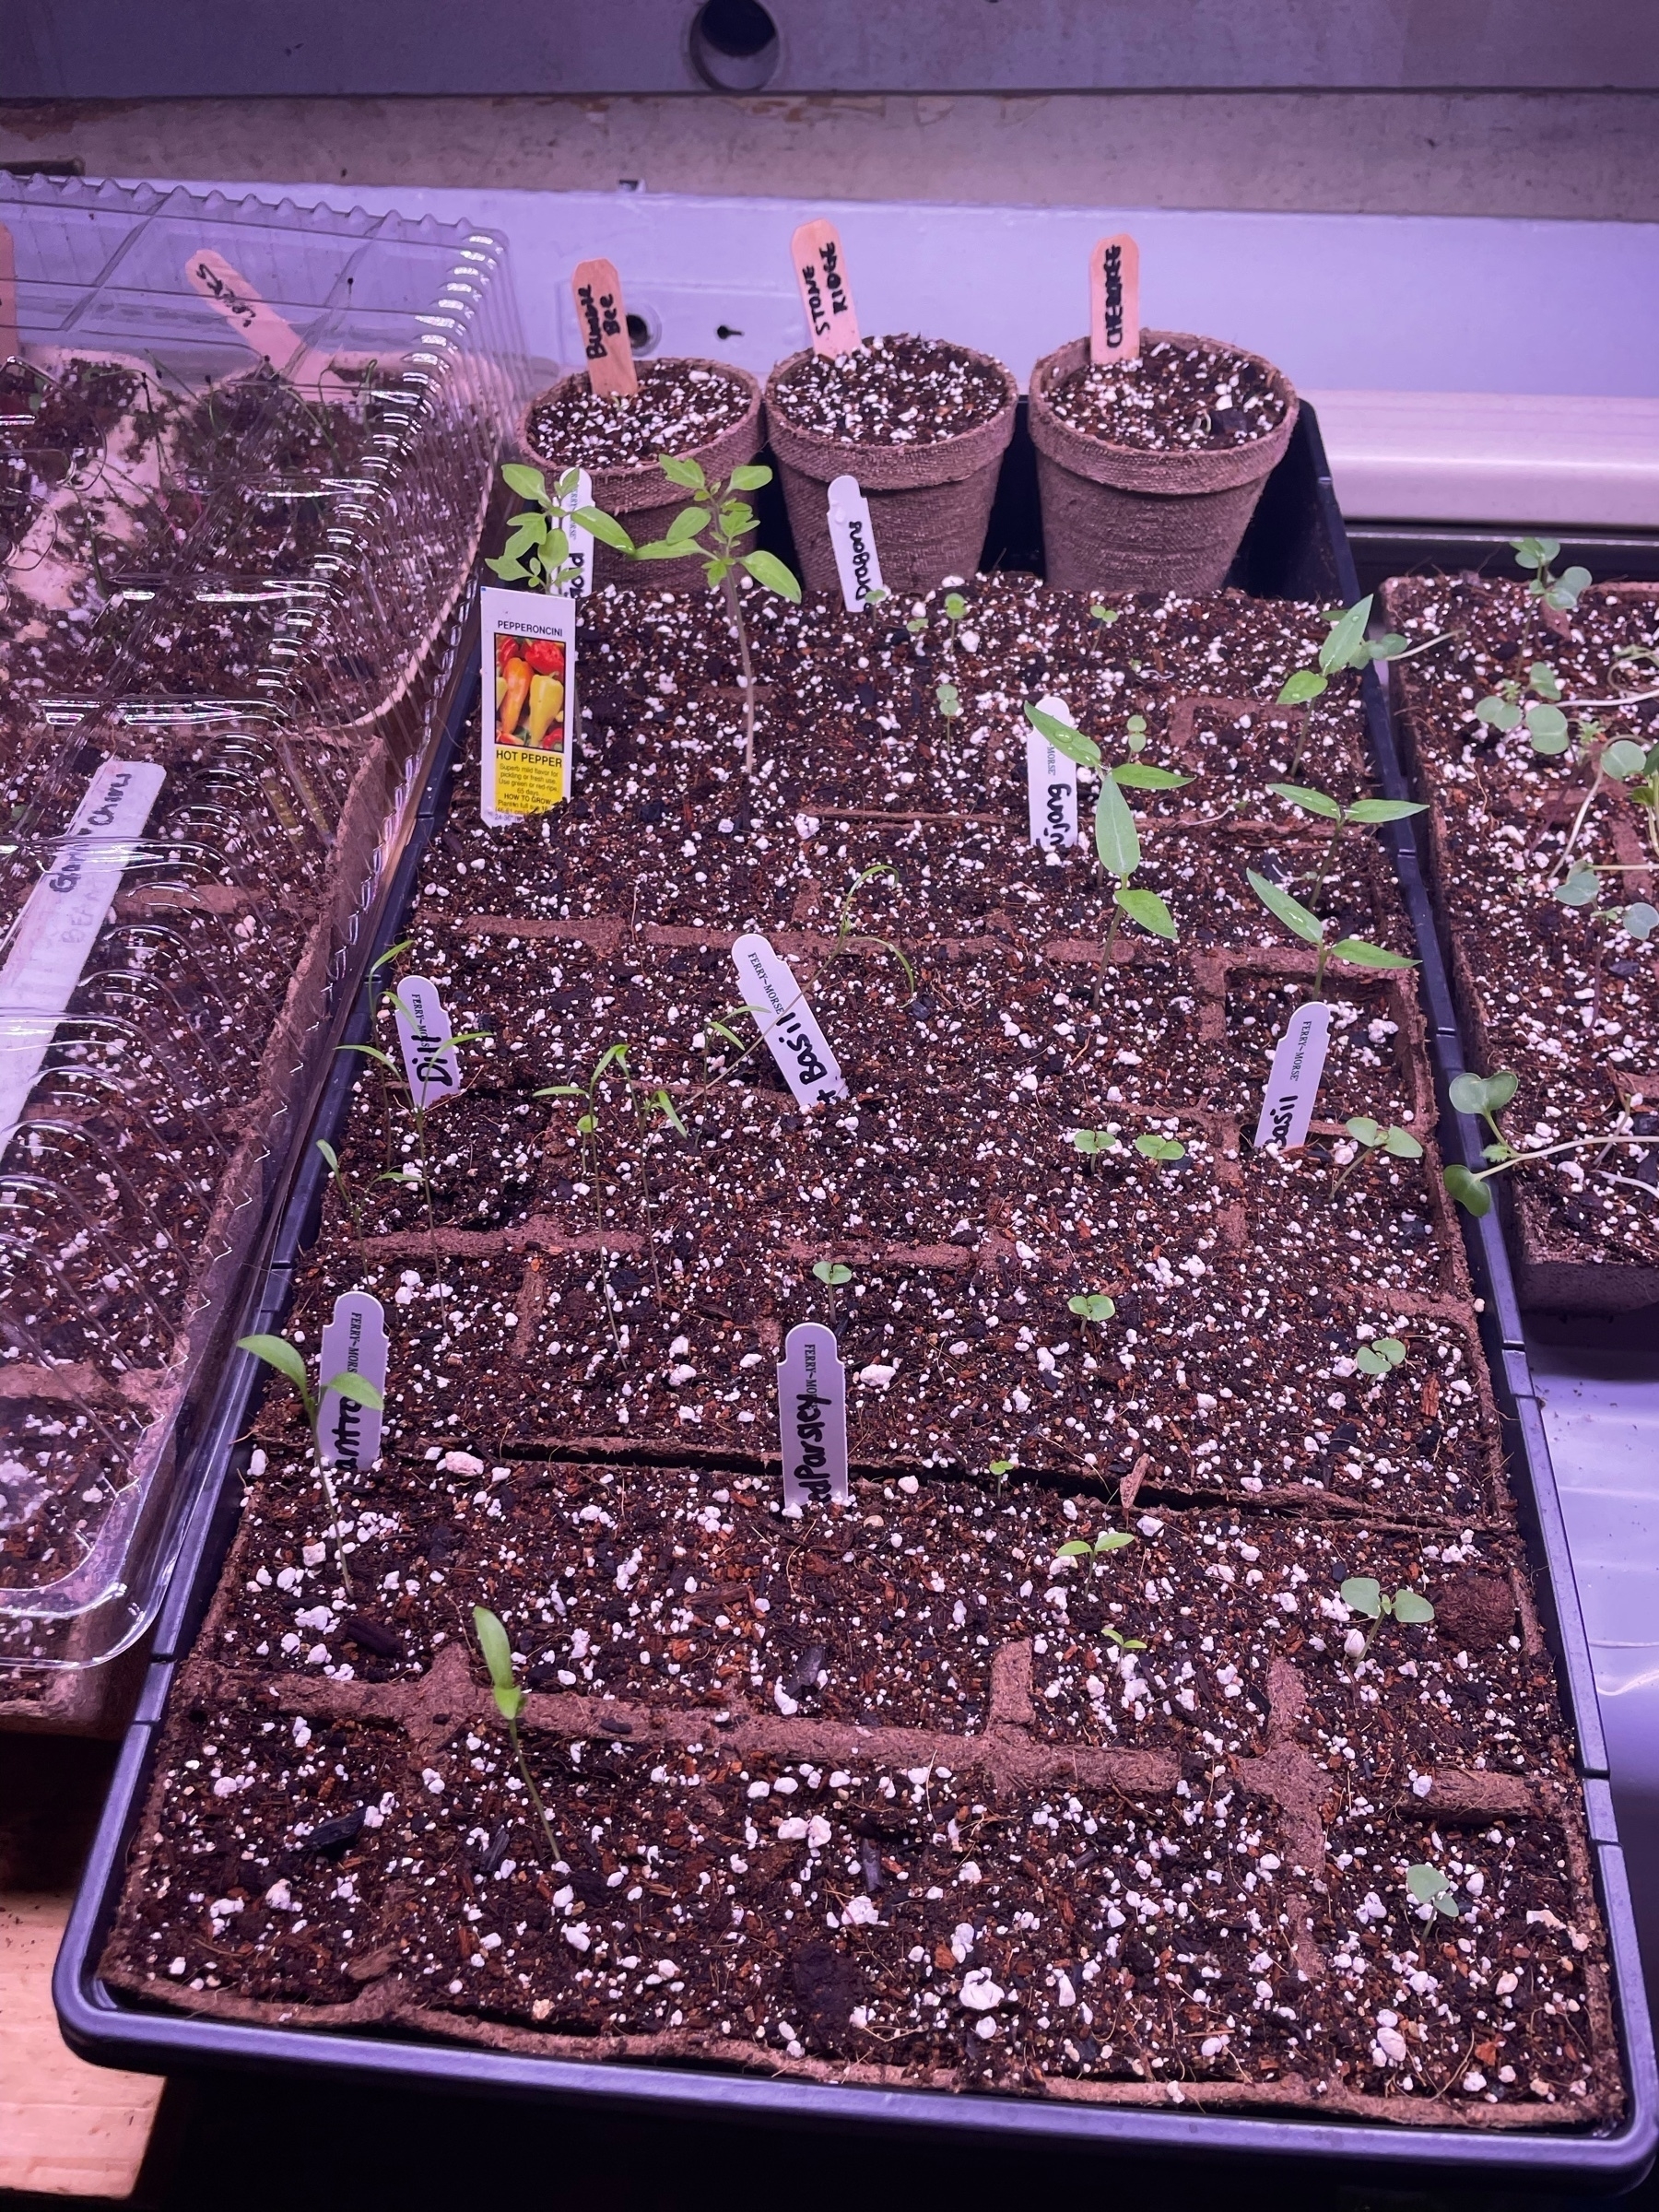 miscellaneous seedlings in a tray